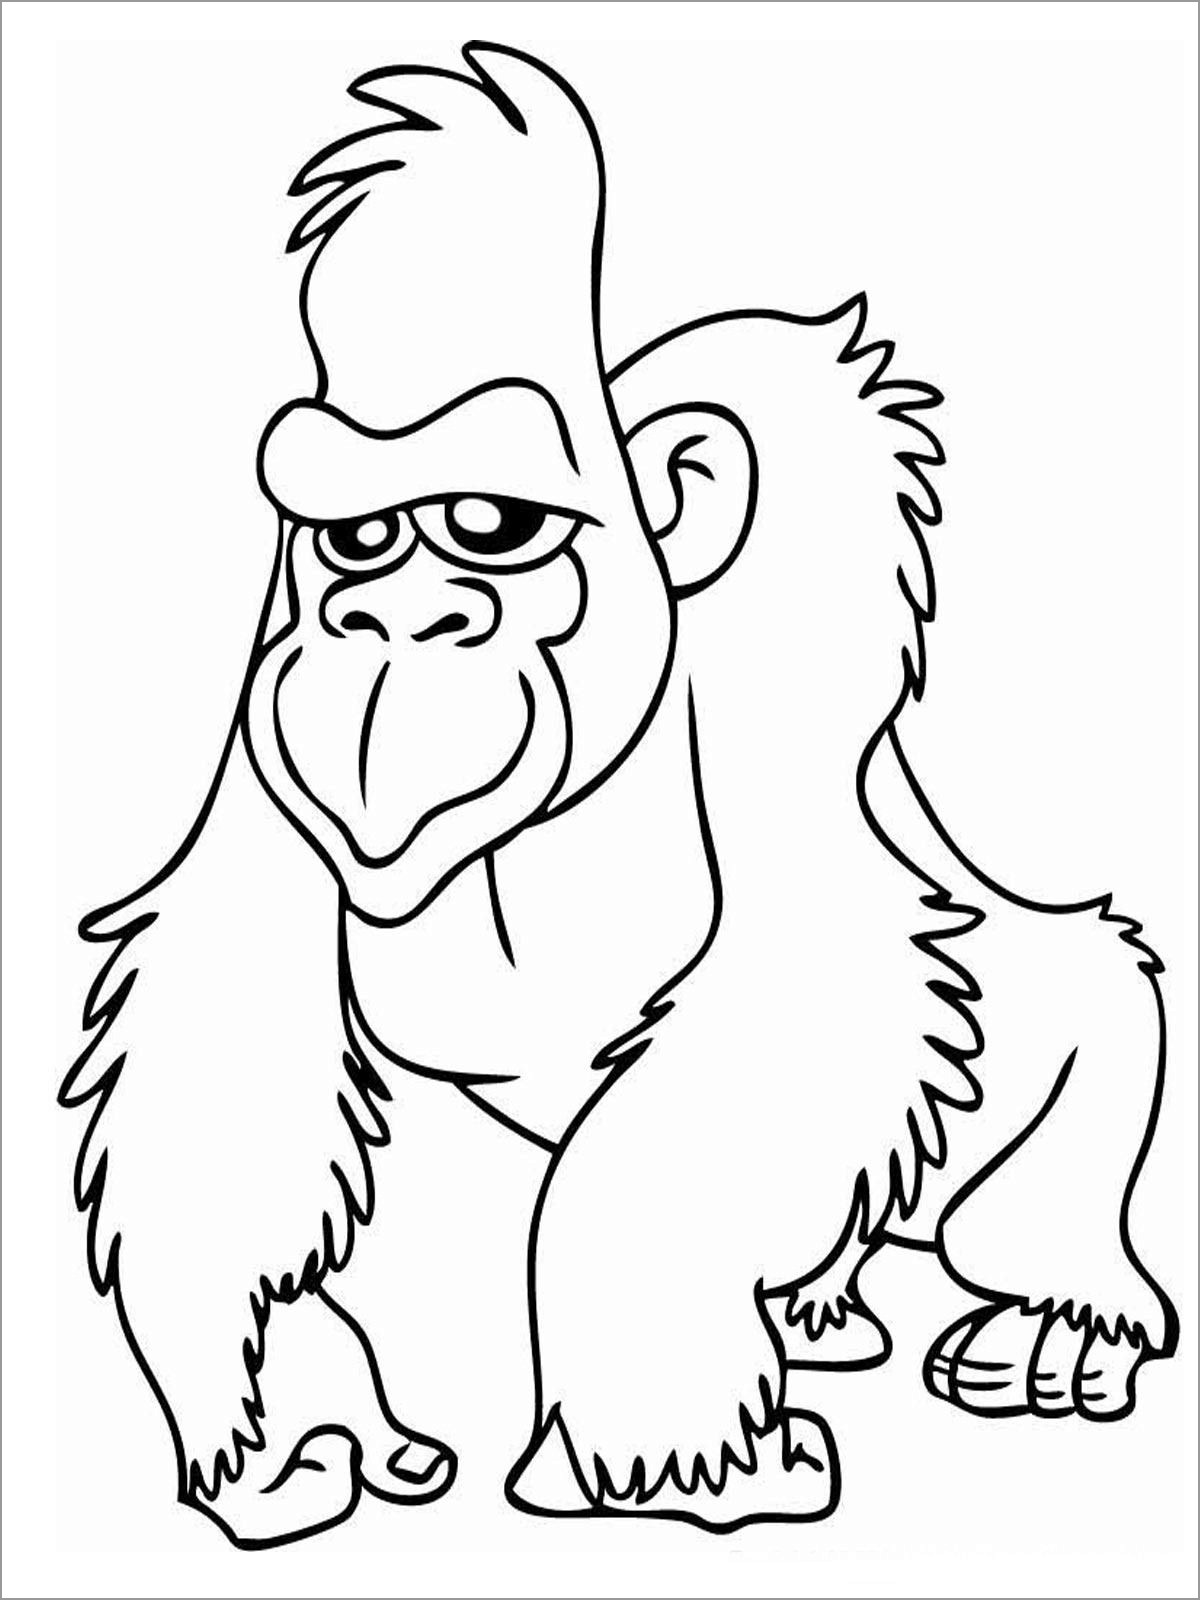 Funny Apes Coloring Pages for Kids